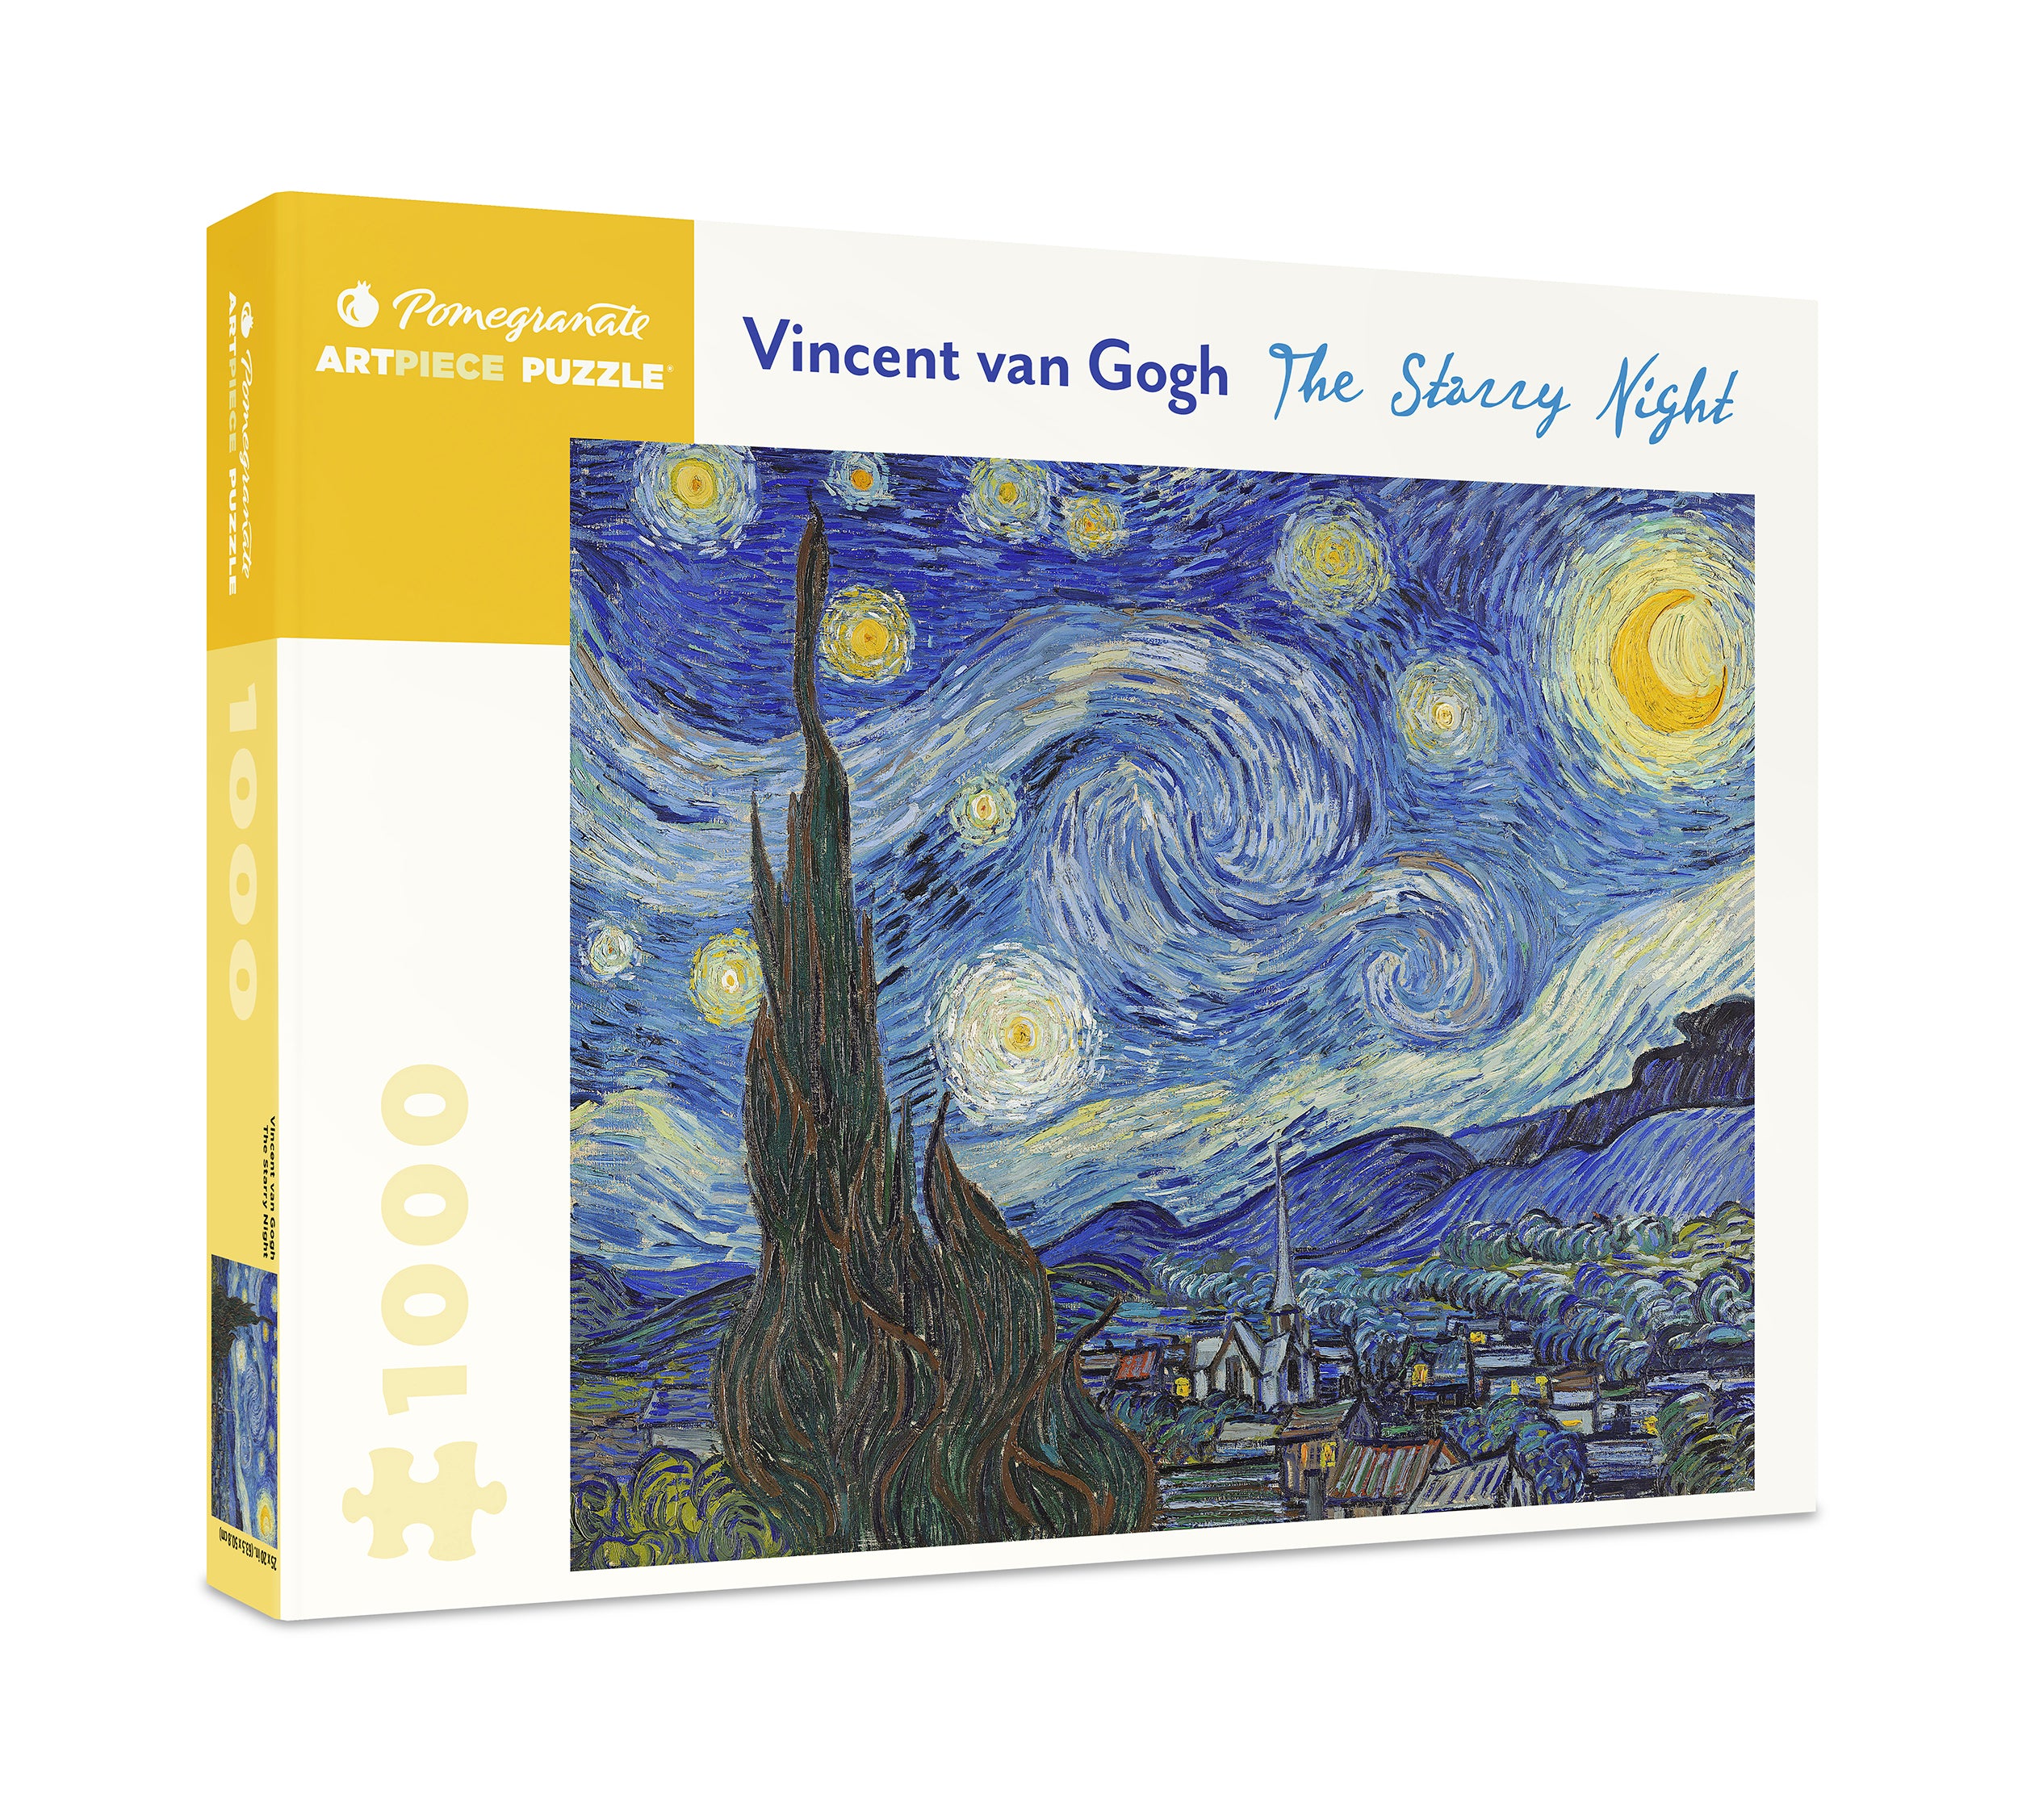 Pomegranate Vincent van Gogh "The Starry Night" 1000 Piece Jigsaw Puzzle